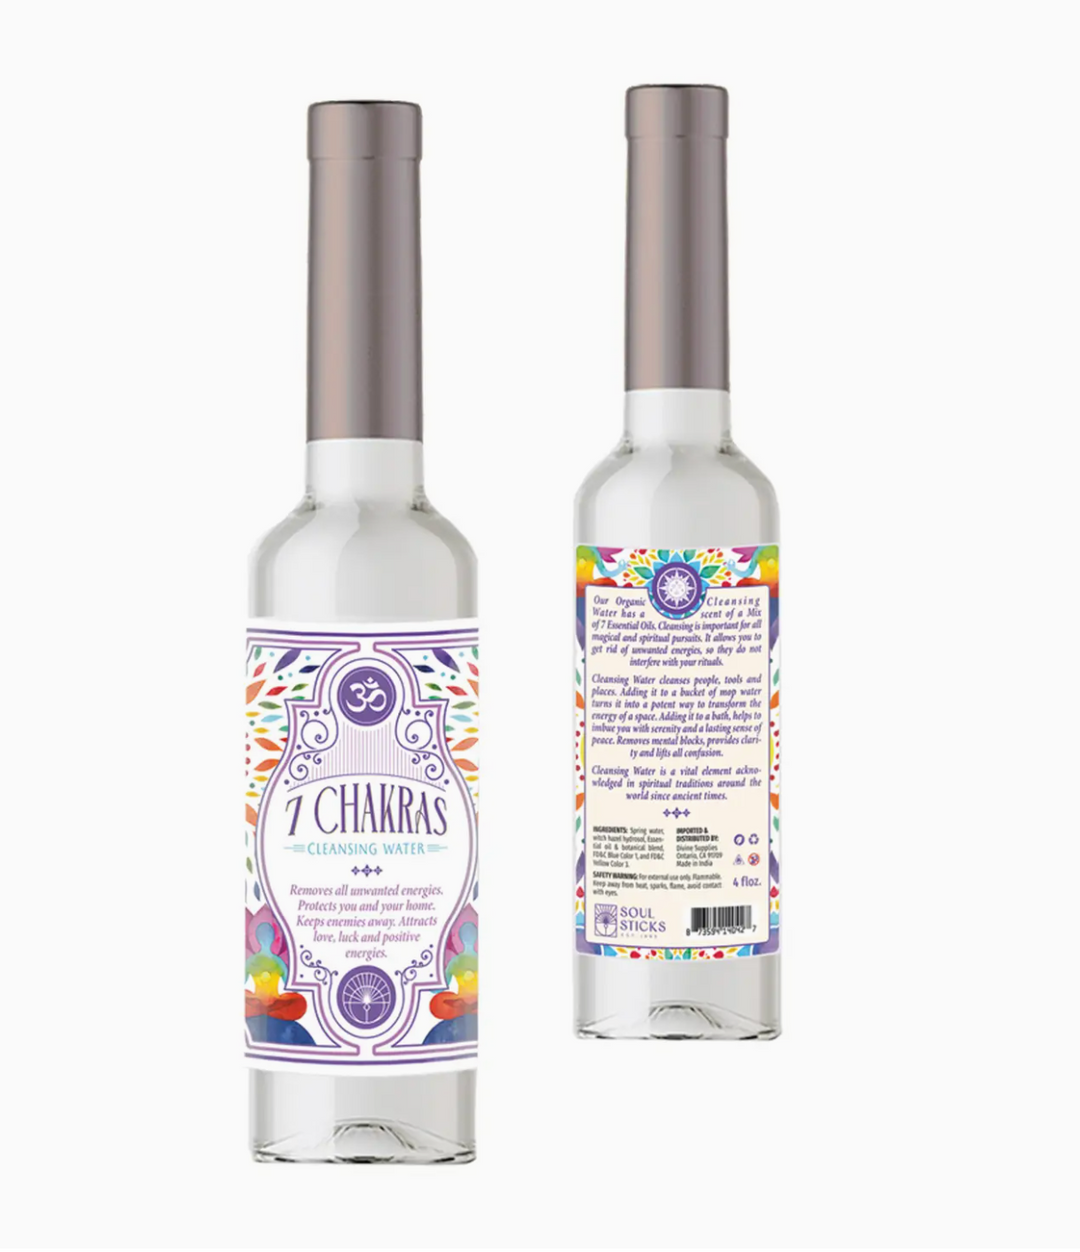 7 Chakras Cleansing Water - ShopSpoiled